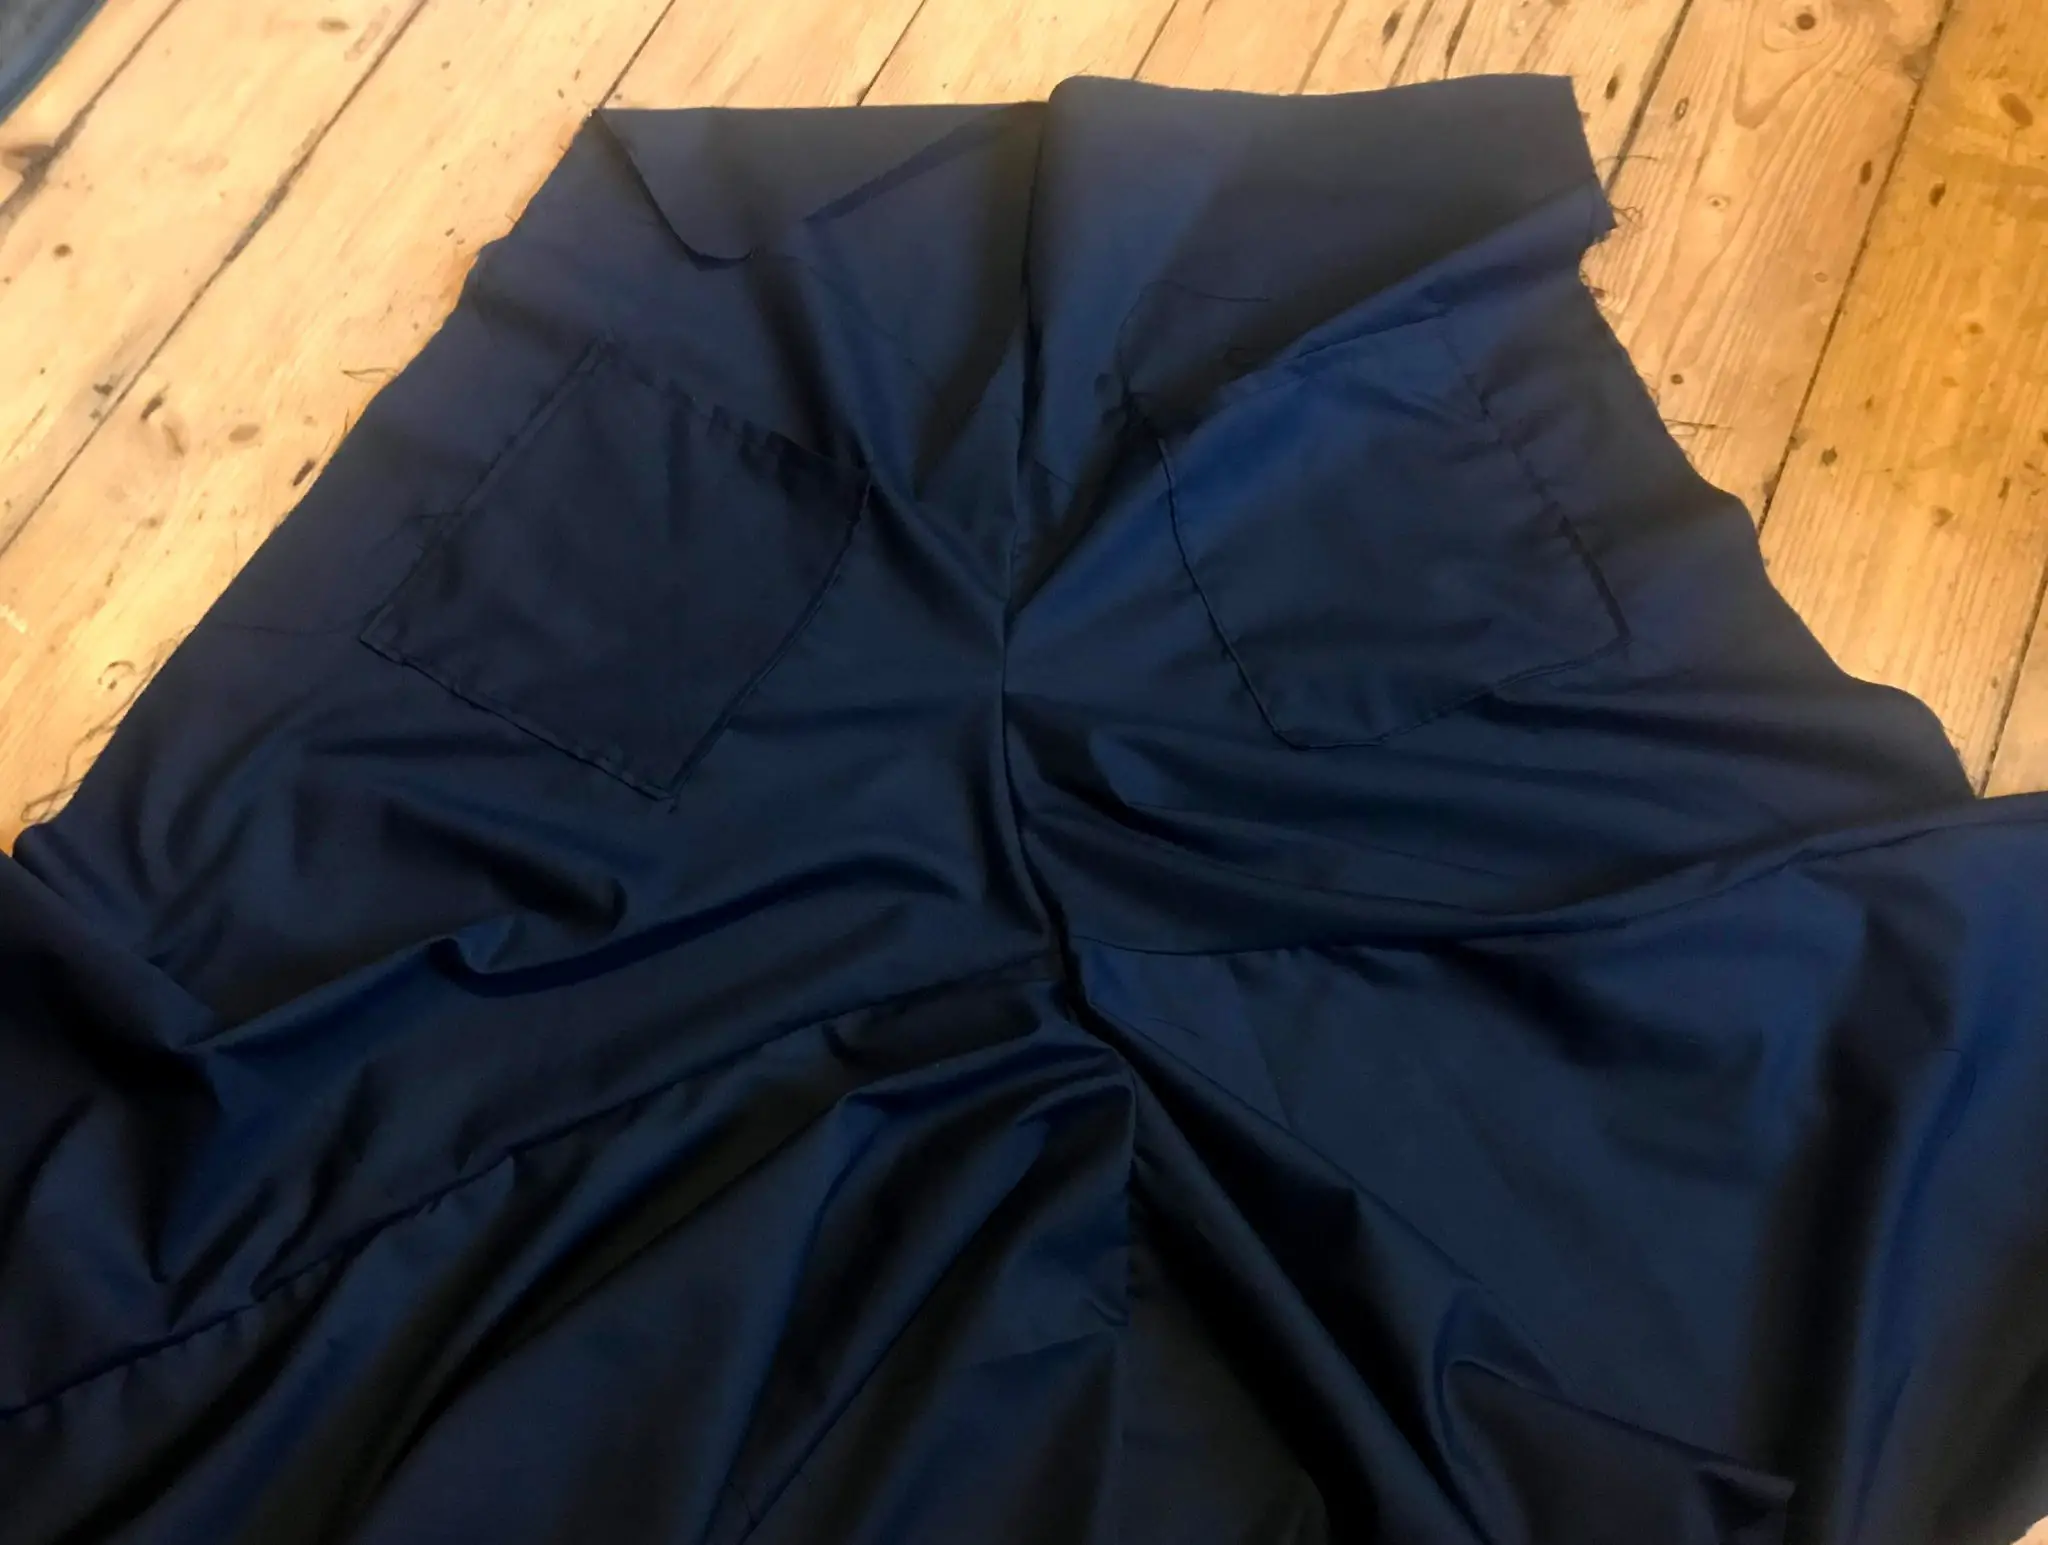 Trousers sewn at the crotch